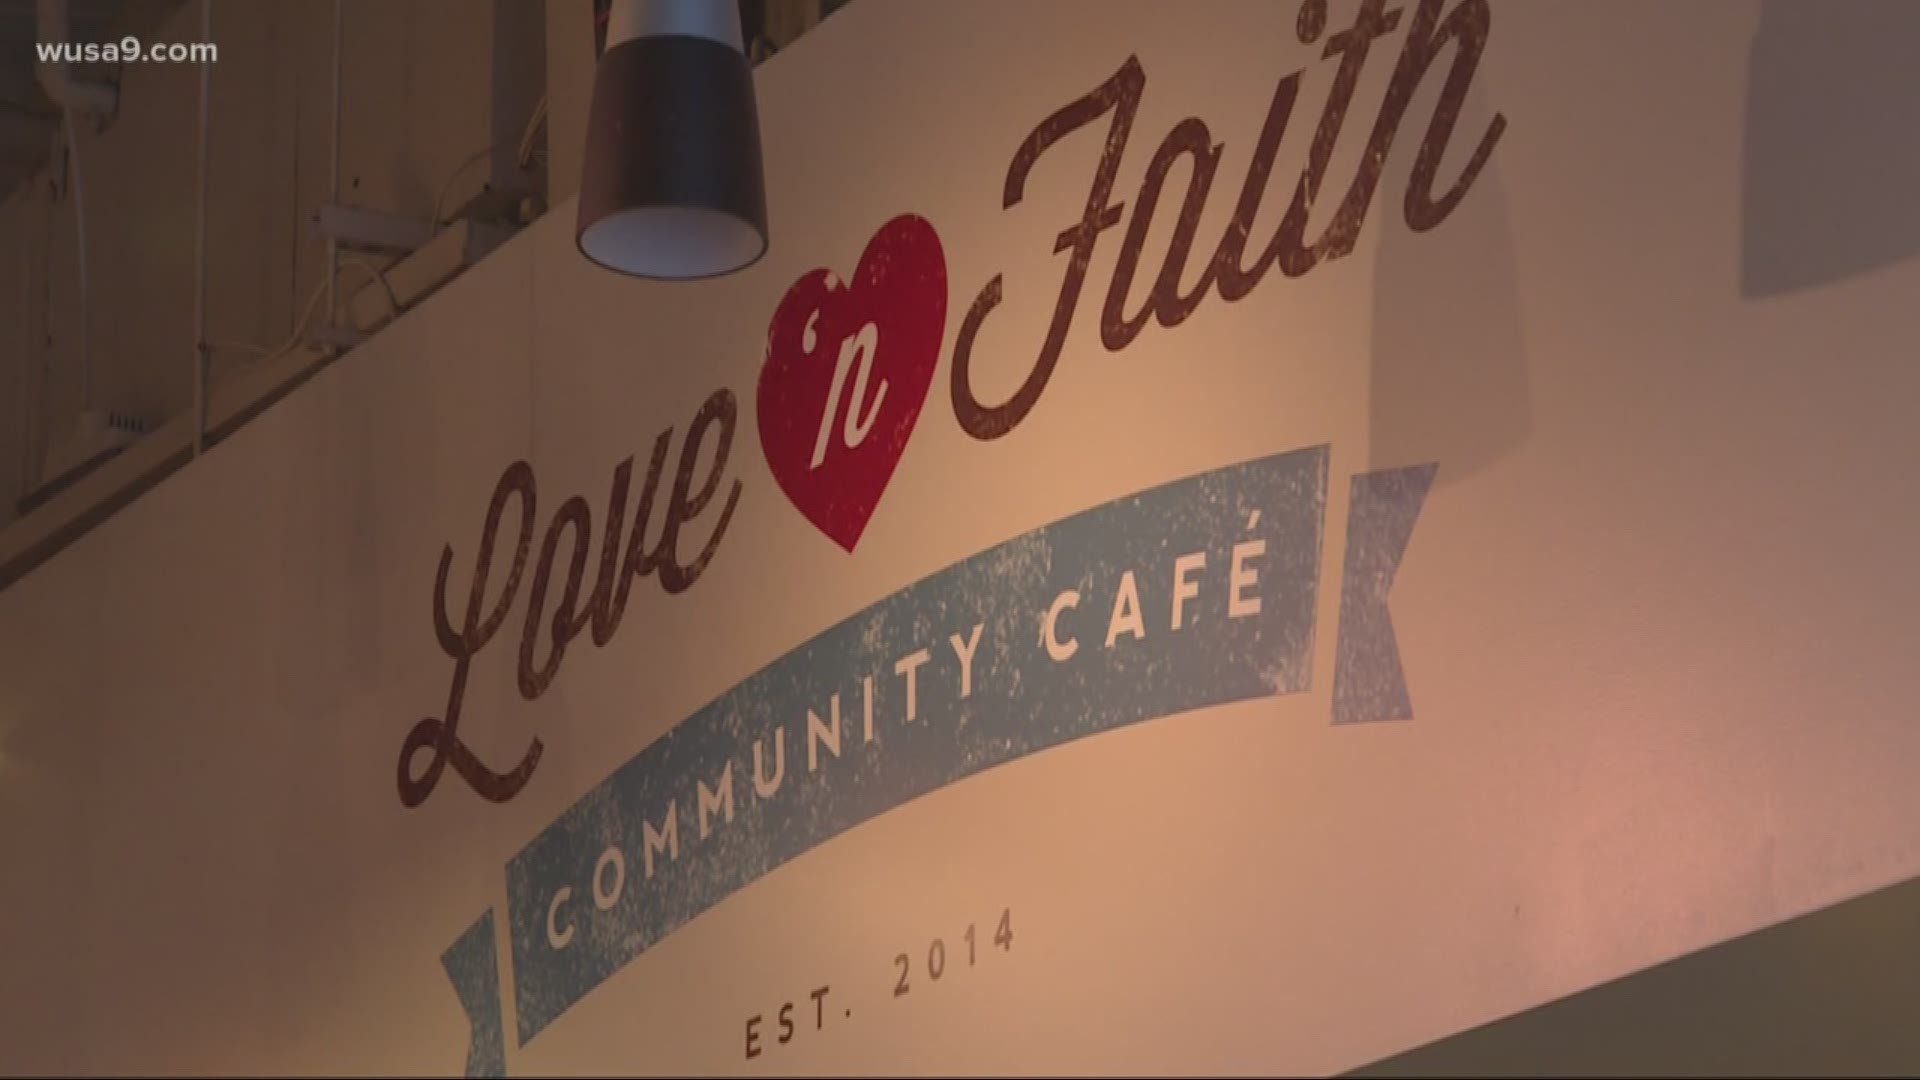 In Northwest D.C., one café owner set up shop with a plan to bring harmony to her community. But, a tough economic reality has forced her to close up shop.